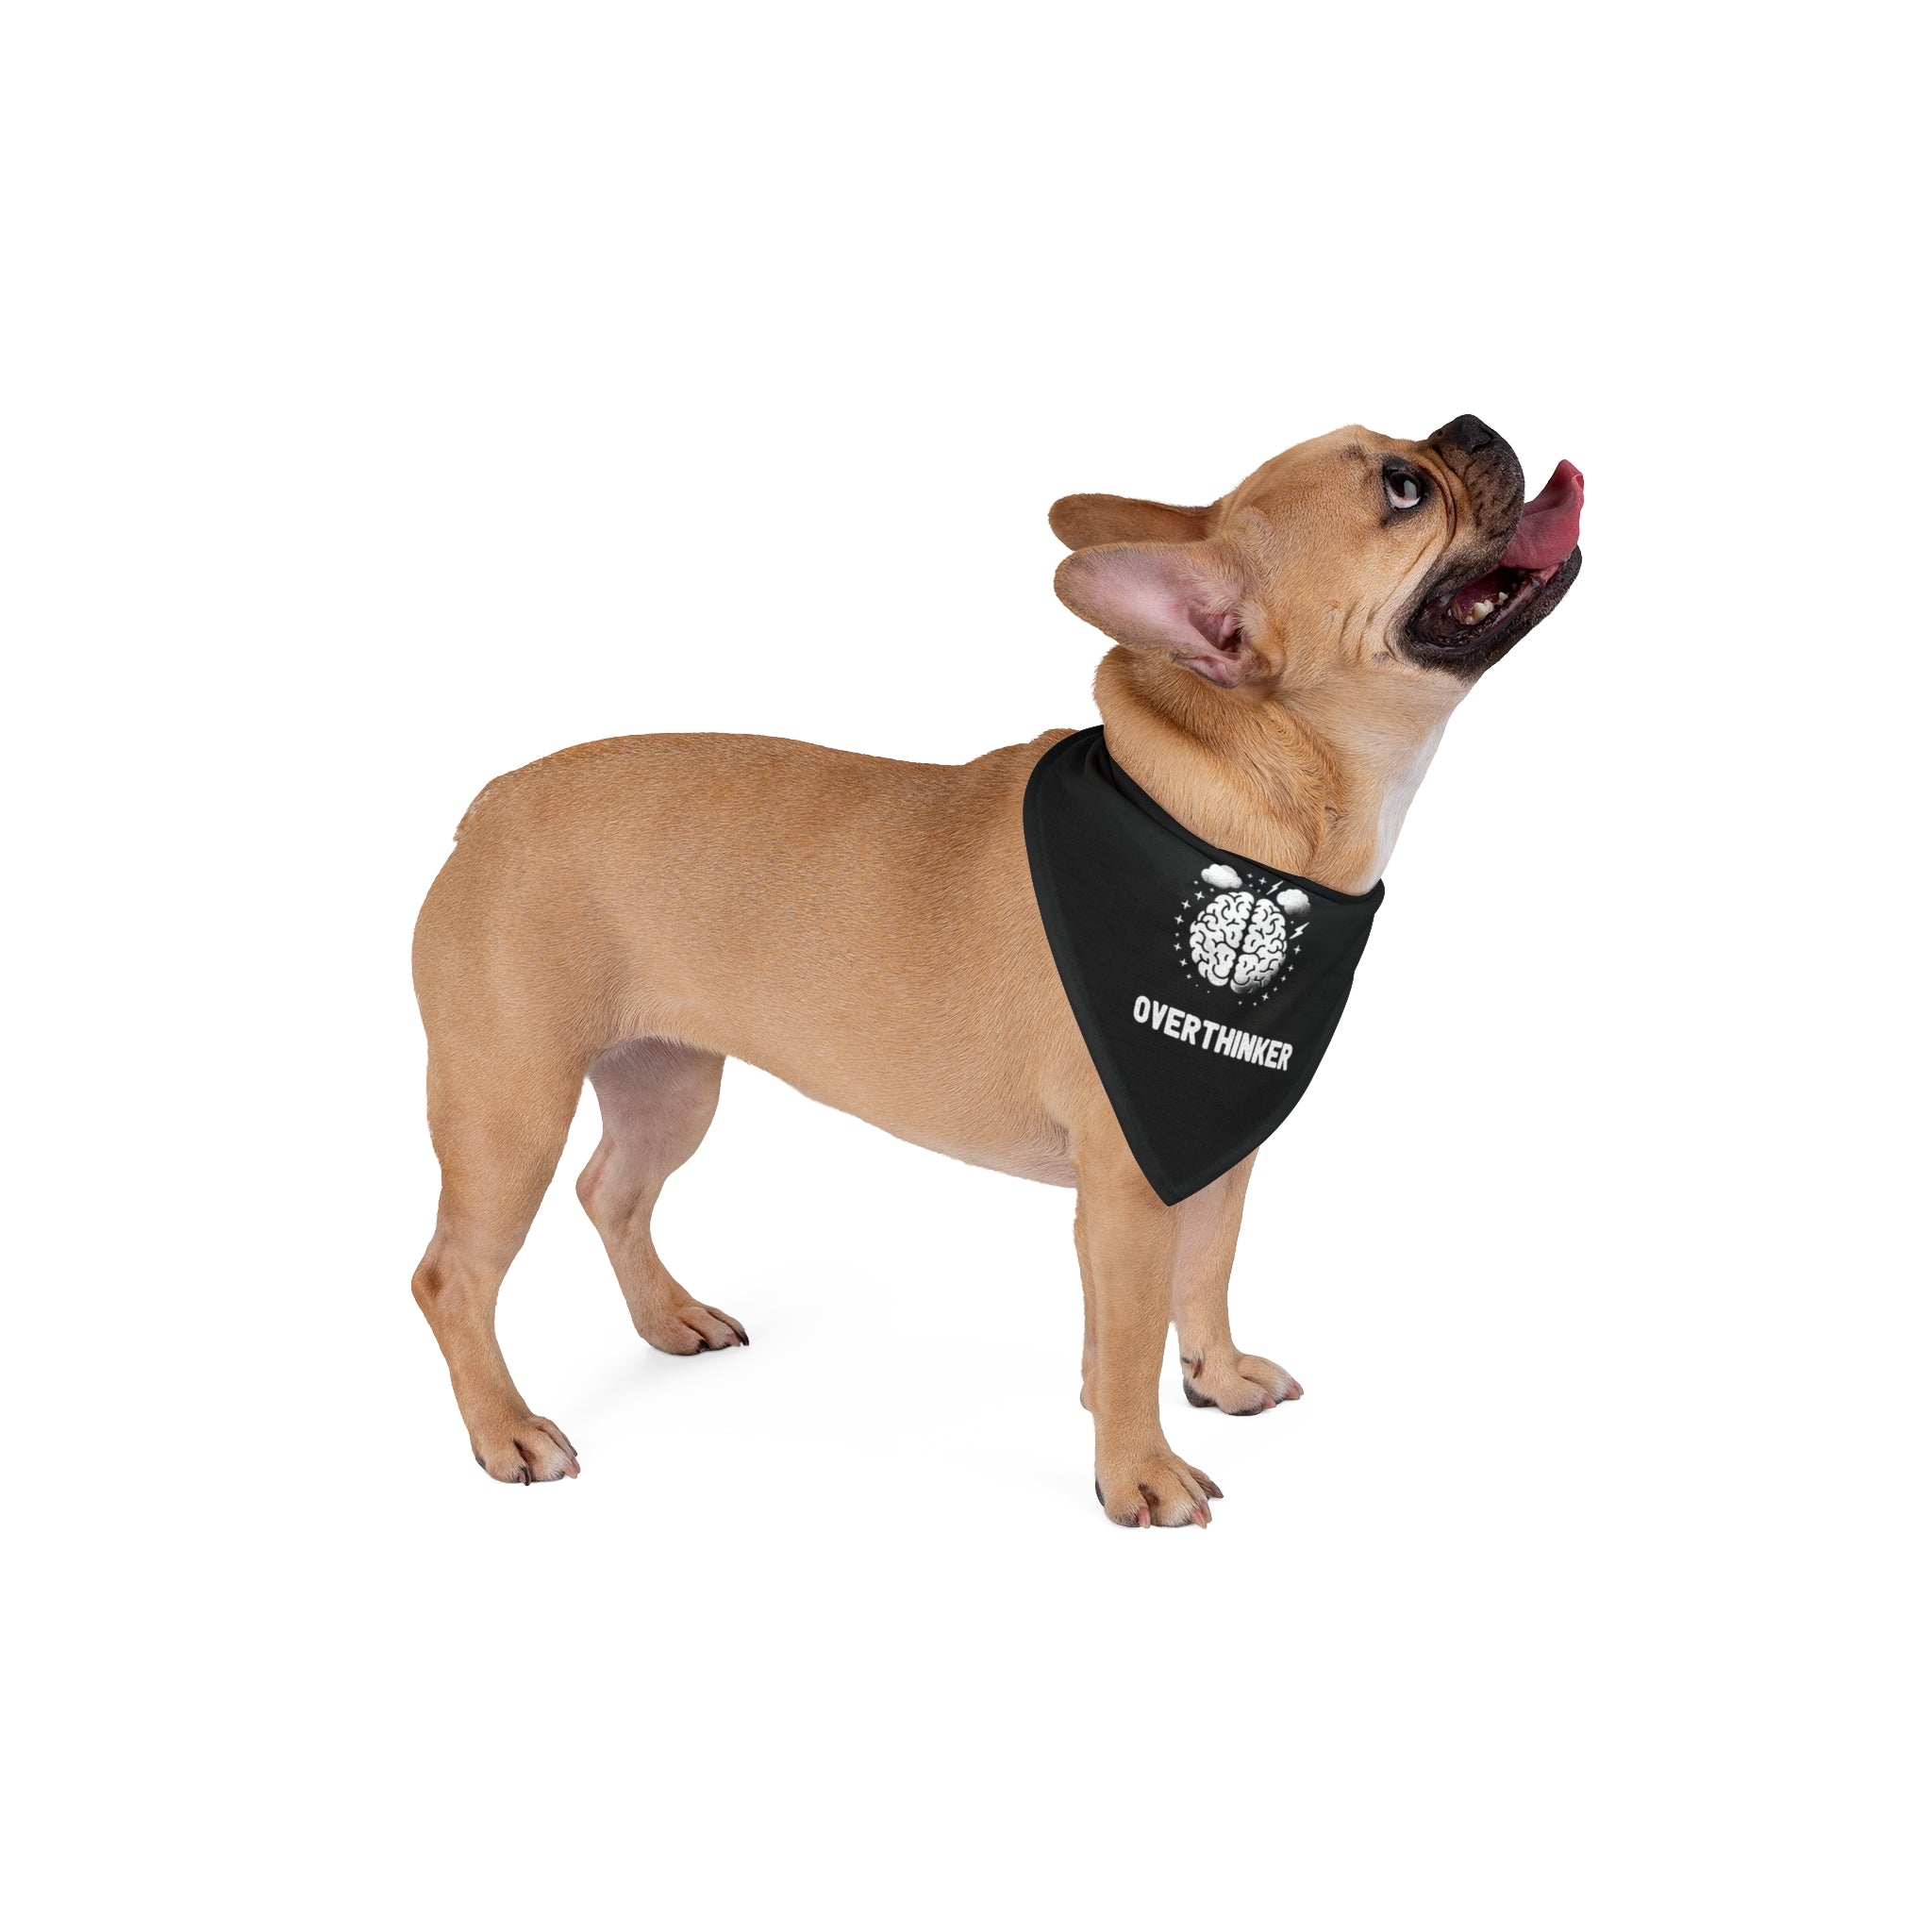 A small brown dog, clearly a conscious pet, sporting a black Professional Overthinker - Pet Bandana made of soft-spun polyester with a white graphic that reads "OVERTHINKER." The dog is looking upwards with its tongue out.